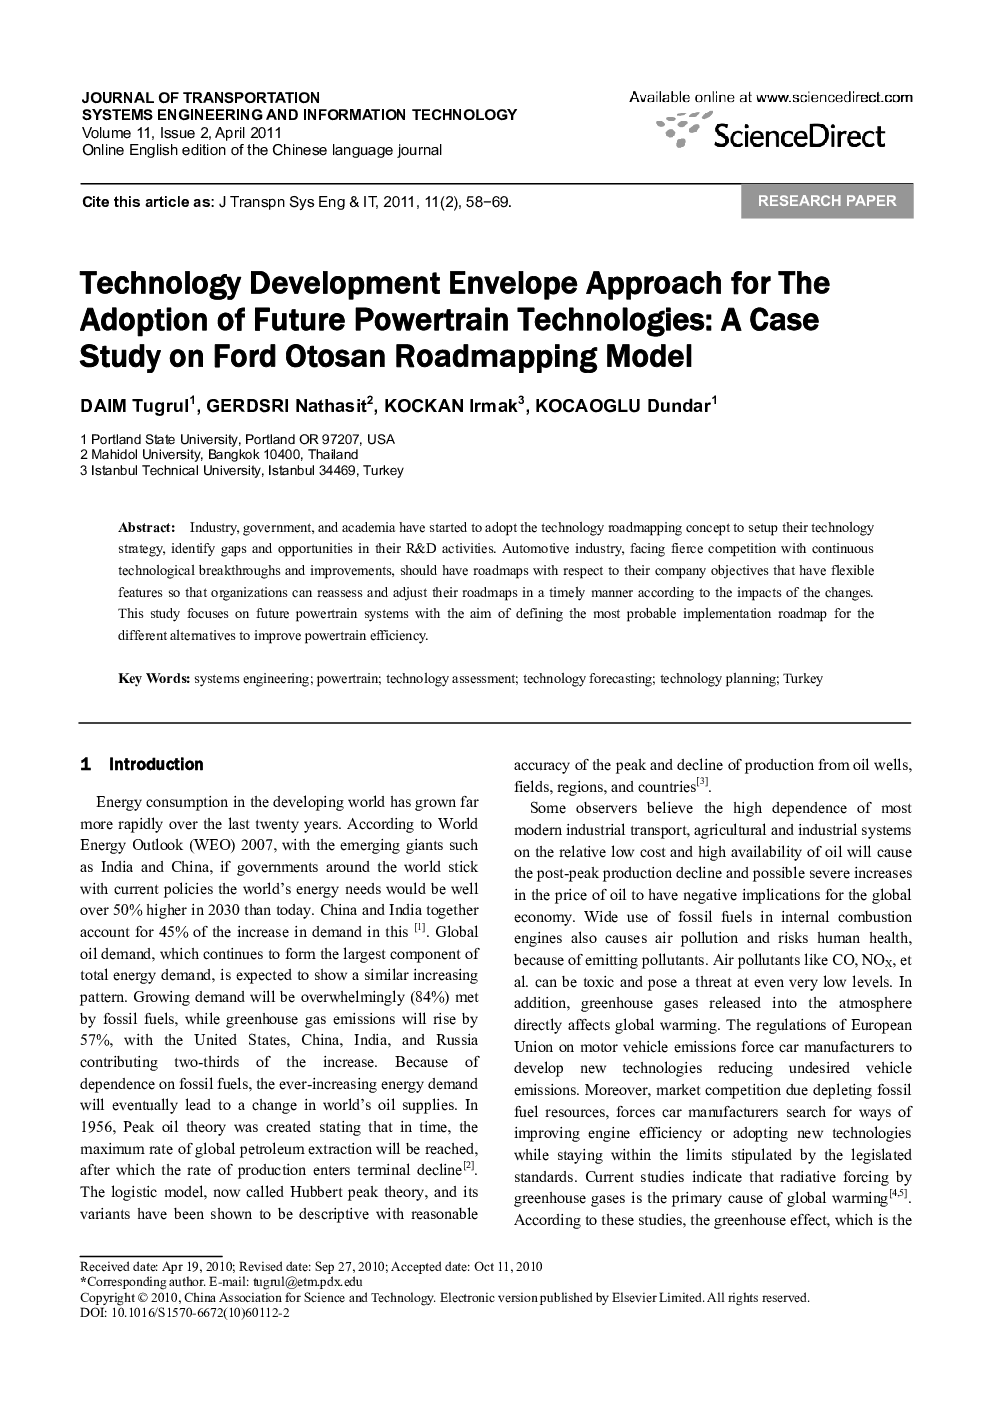 Technology Development Envelope Approach for The Adoption of Future Powertrain Technologies: A Case Study on Ford Otosan Roadmapping Model